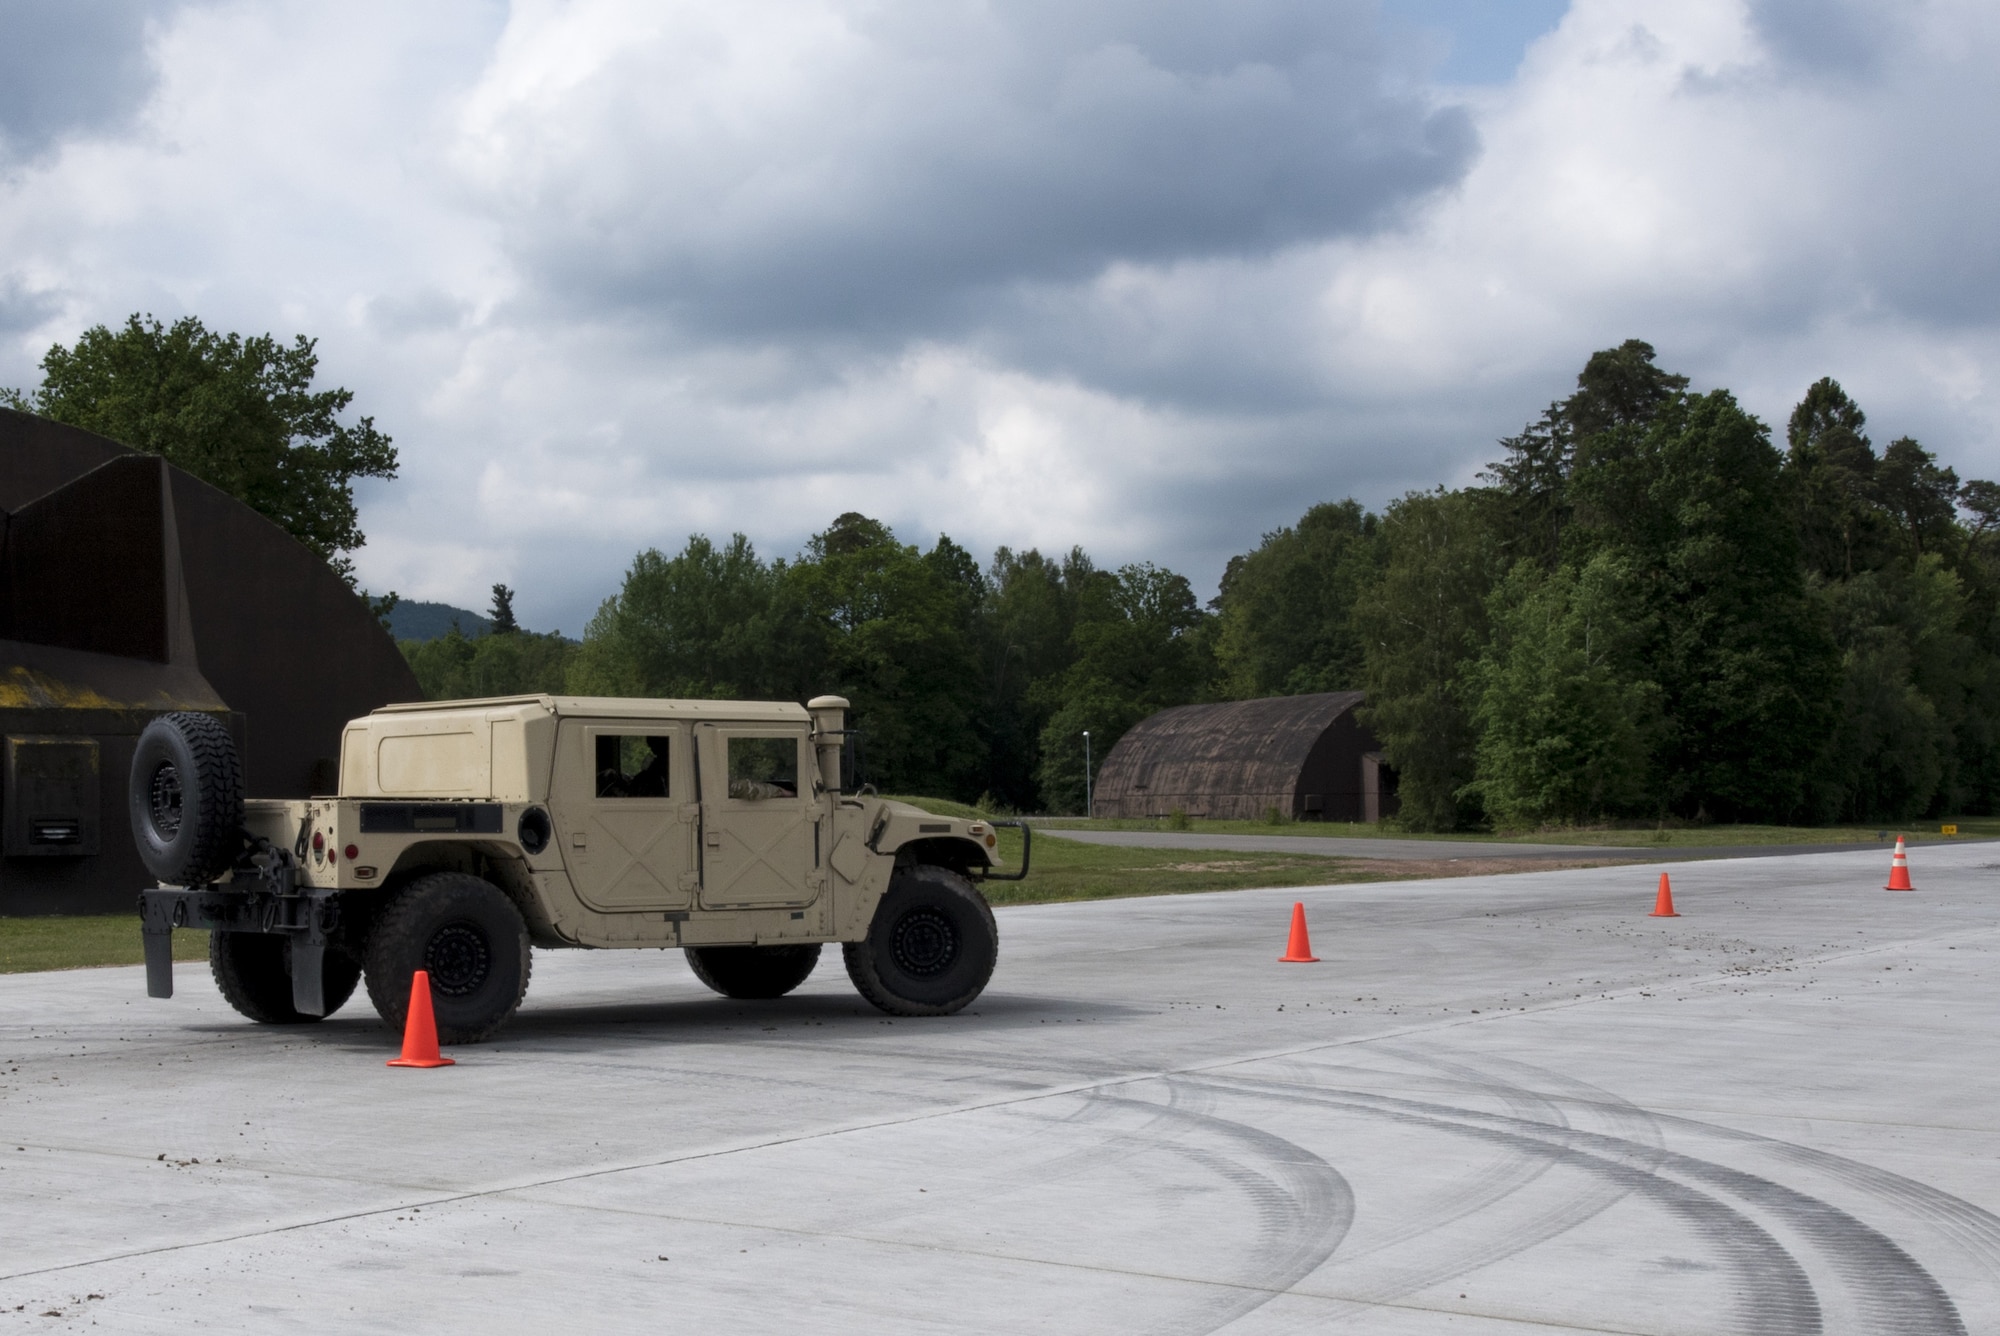 Students of the Landing Zone Safety Officer course practice driving a humvee on Ramstein Air Base, Germany, May 23, 2019. This training allows them to be more versatile down range. (U.S. Air Force Photo by Airman 1st Class Kaylea Berry)